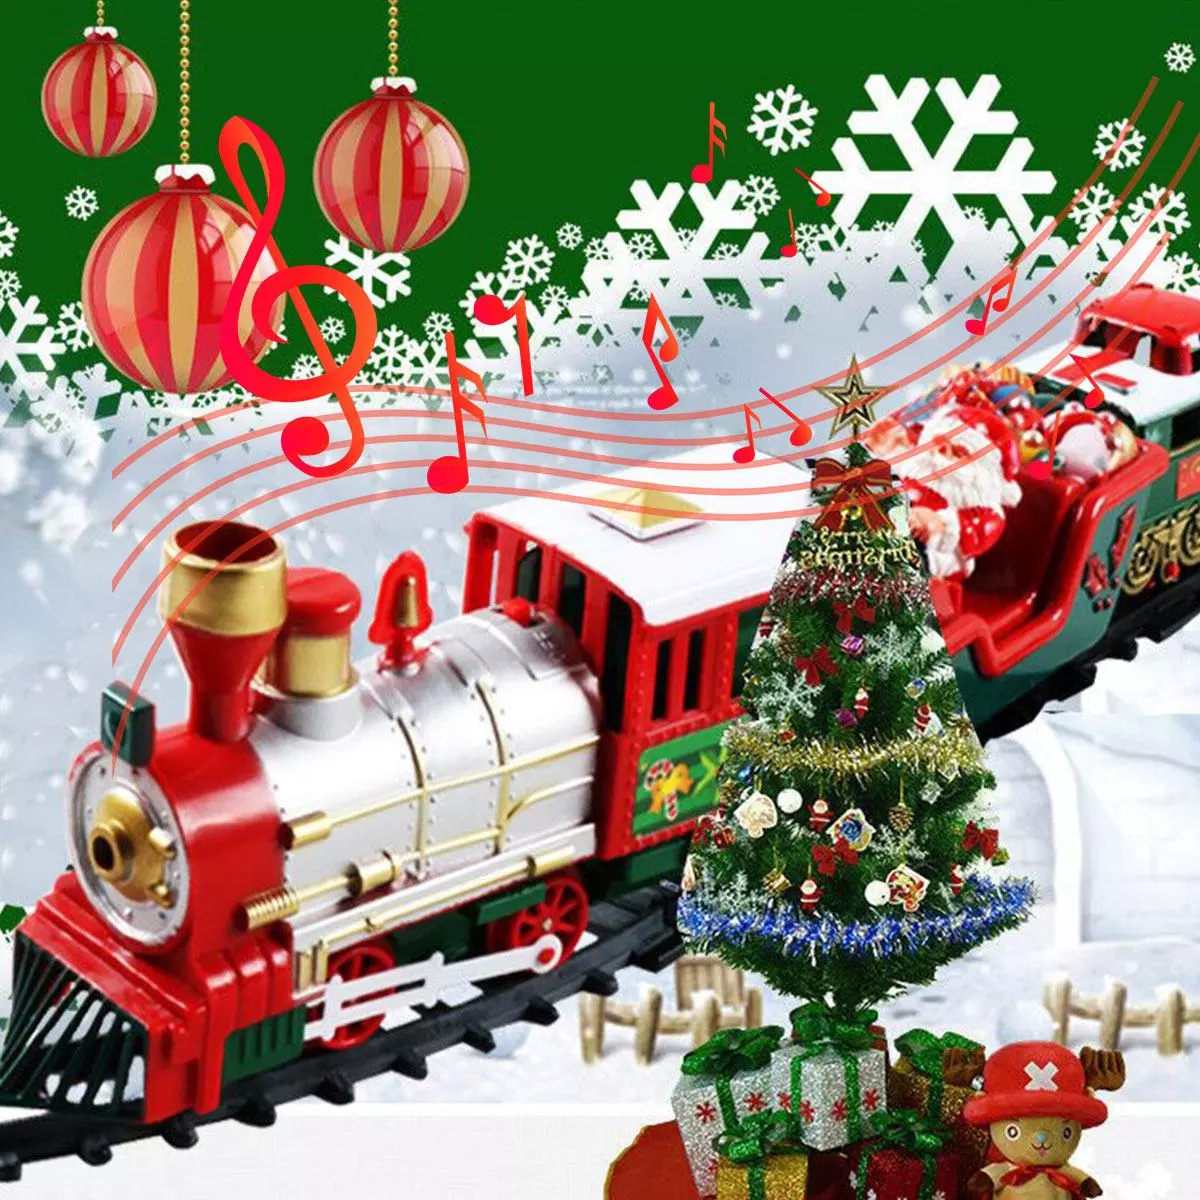 Christmas Electric Train Toys Railway Toy Cars Racing Track With Music Santa Claus Christmas Tree Decoration Train Model Toys